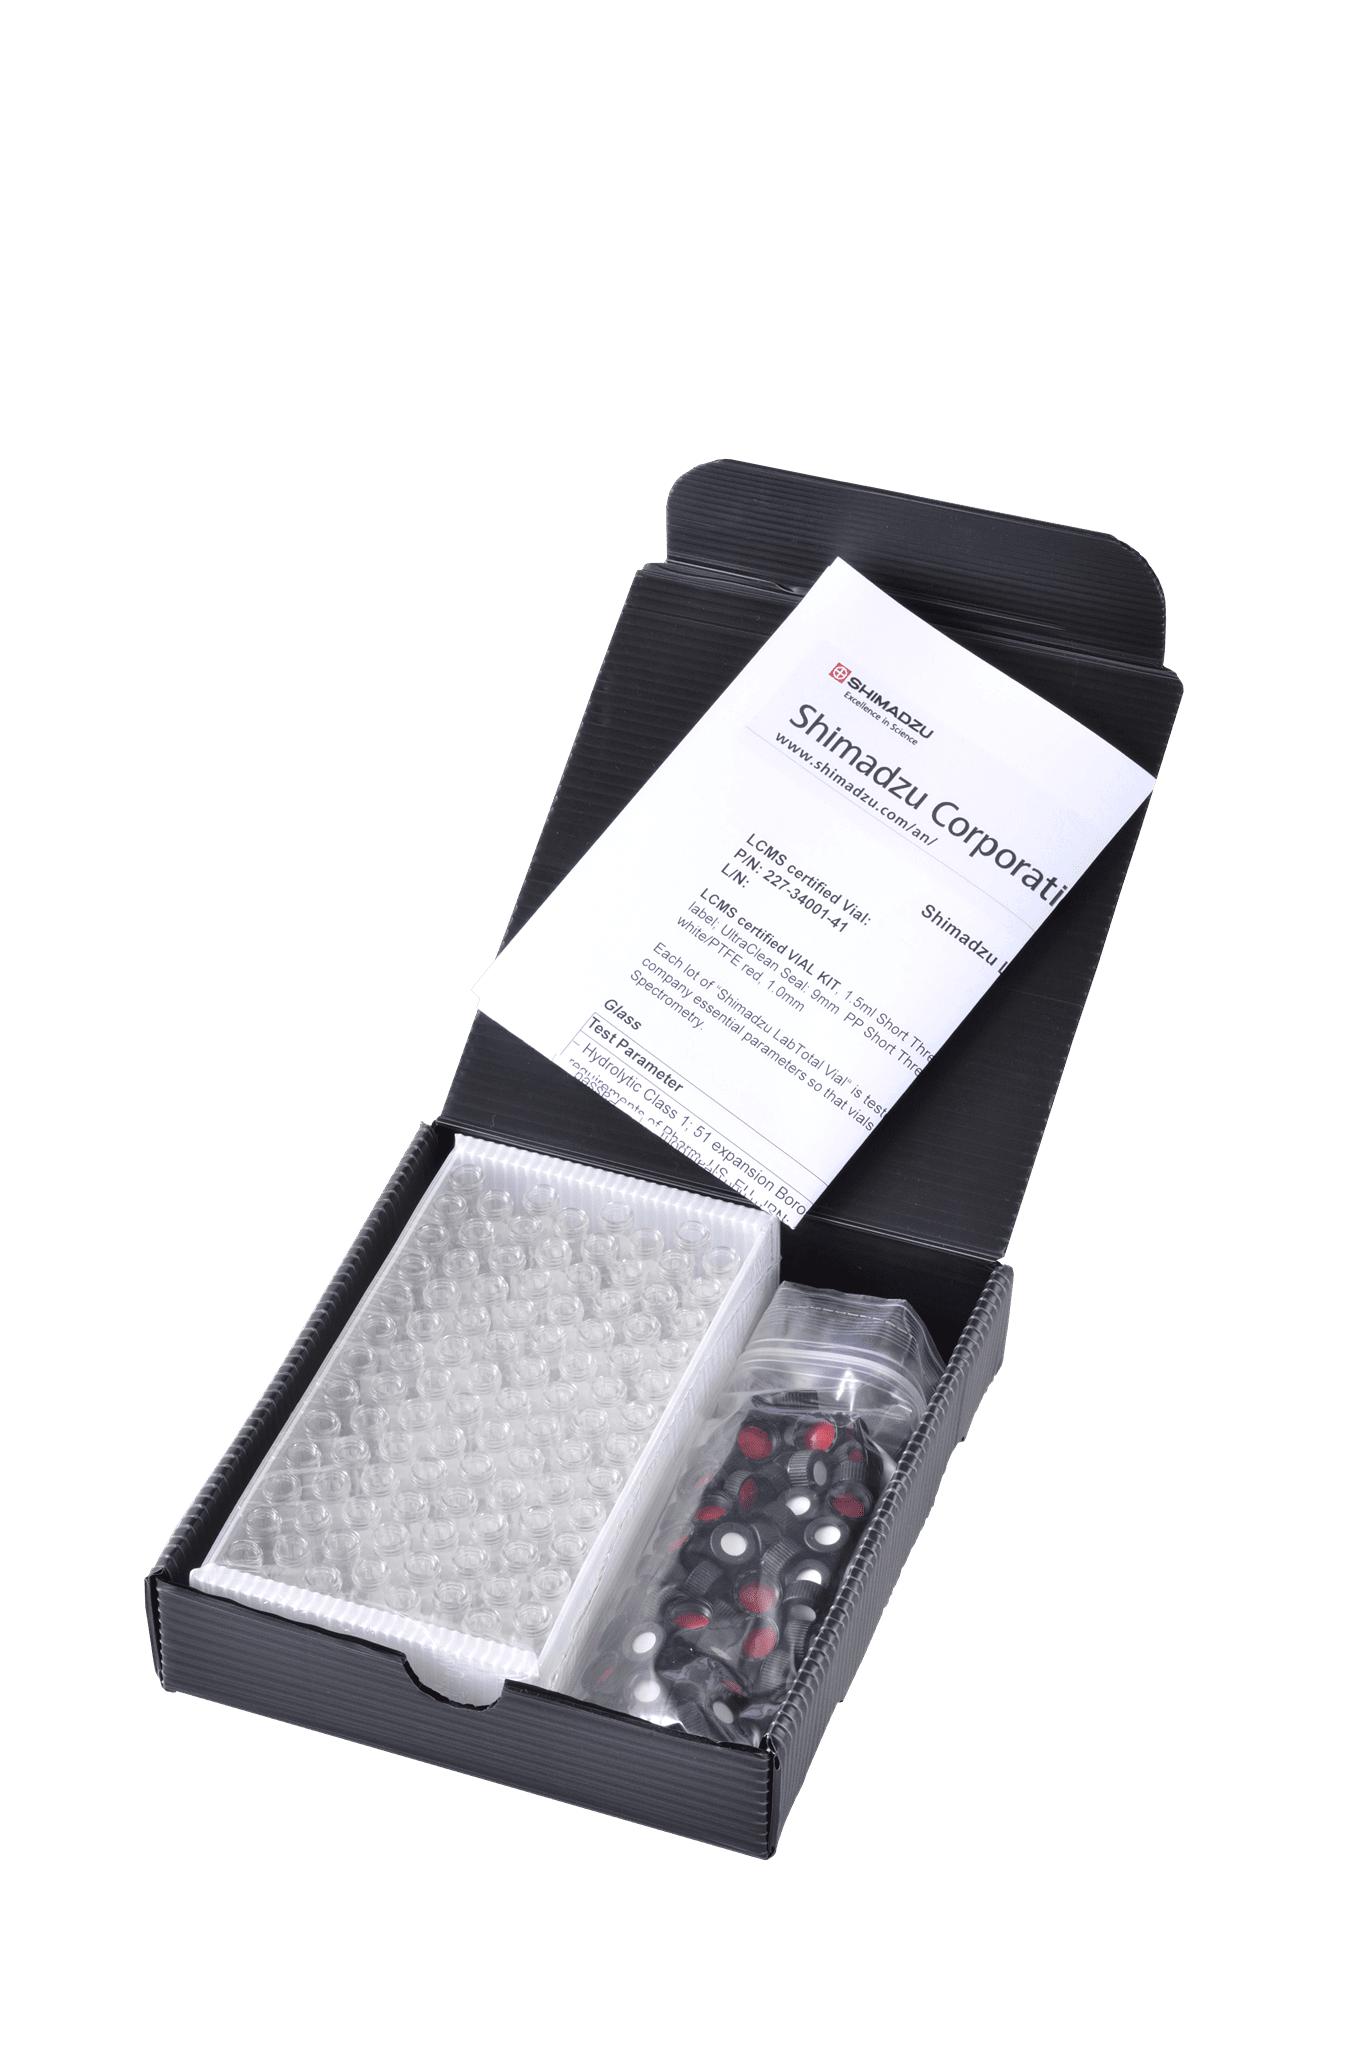 Obrázek Certified Kit 1.5 ml for LC/LCMS, clear glass with label, wide open , with Shimadzu certificate